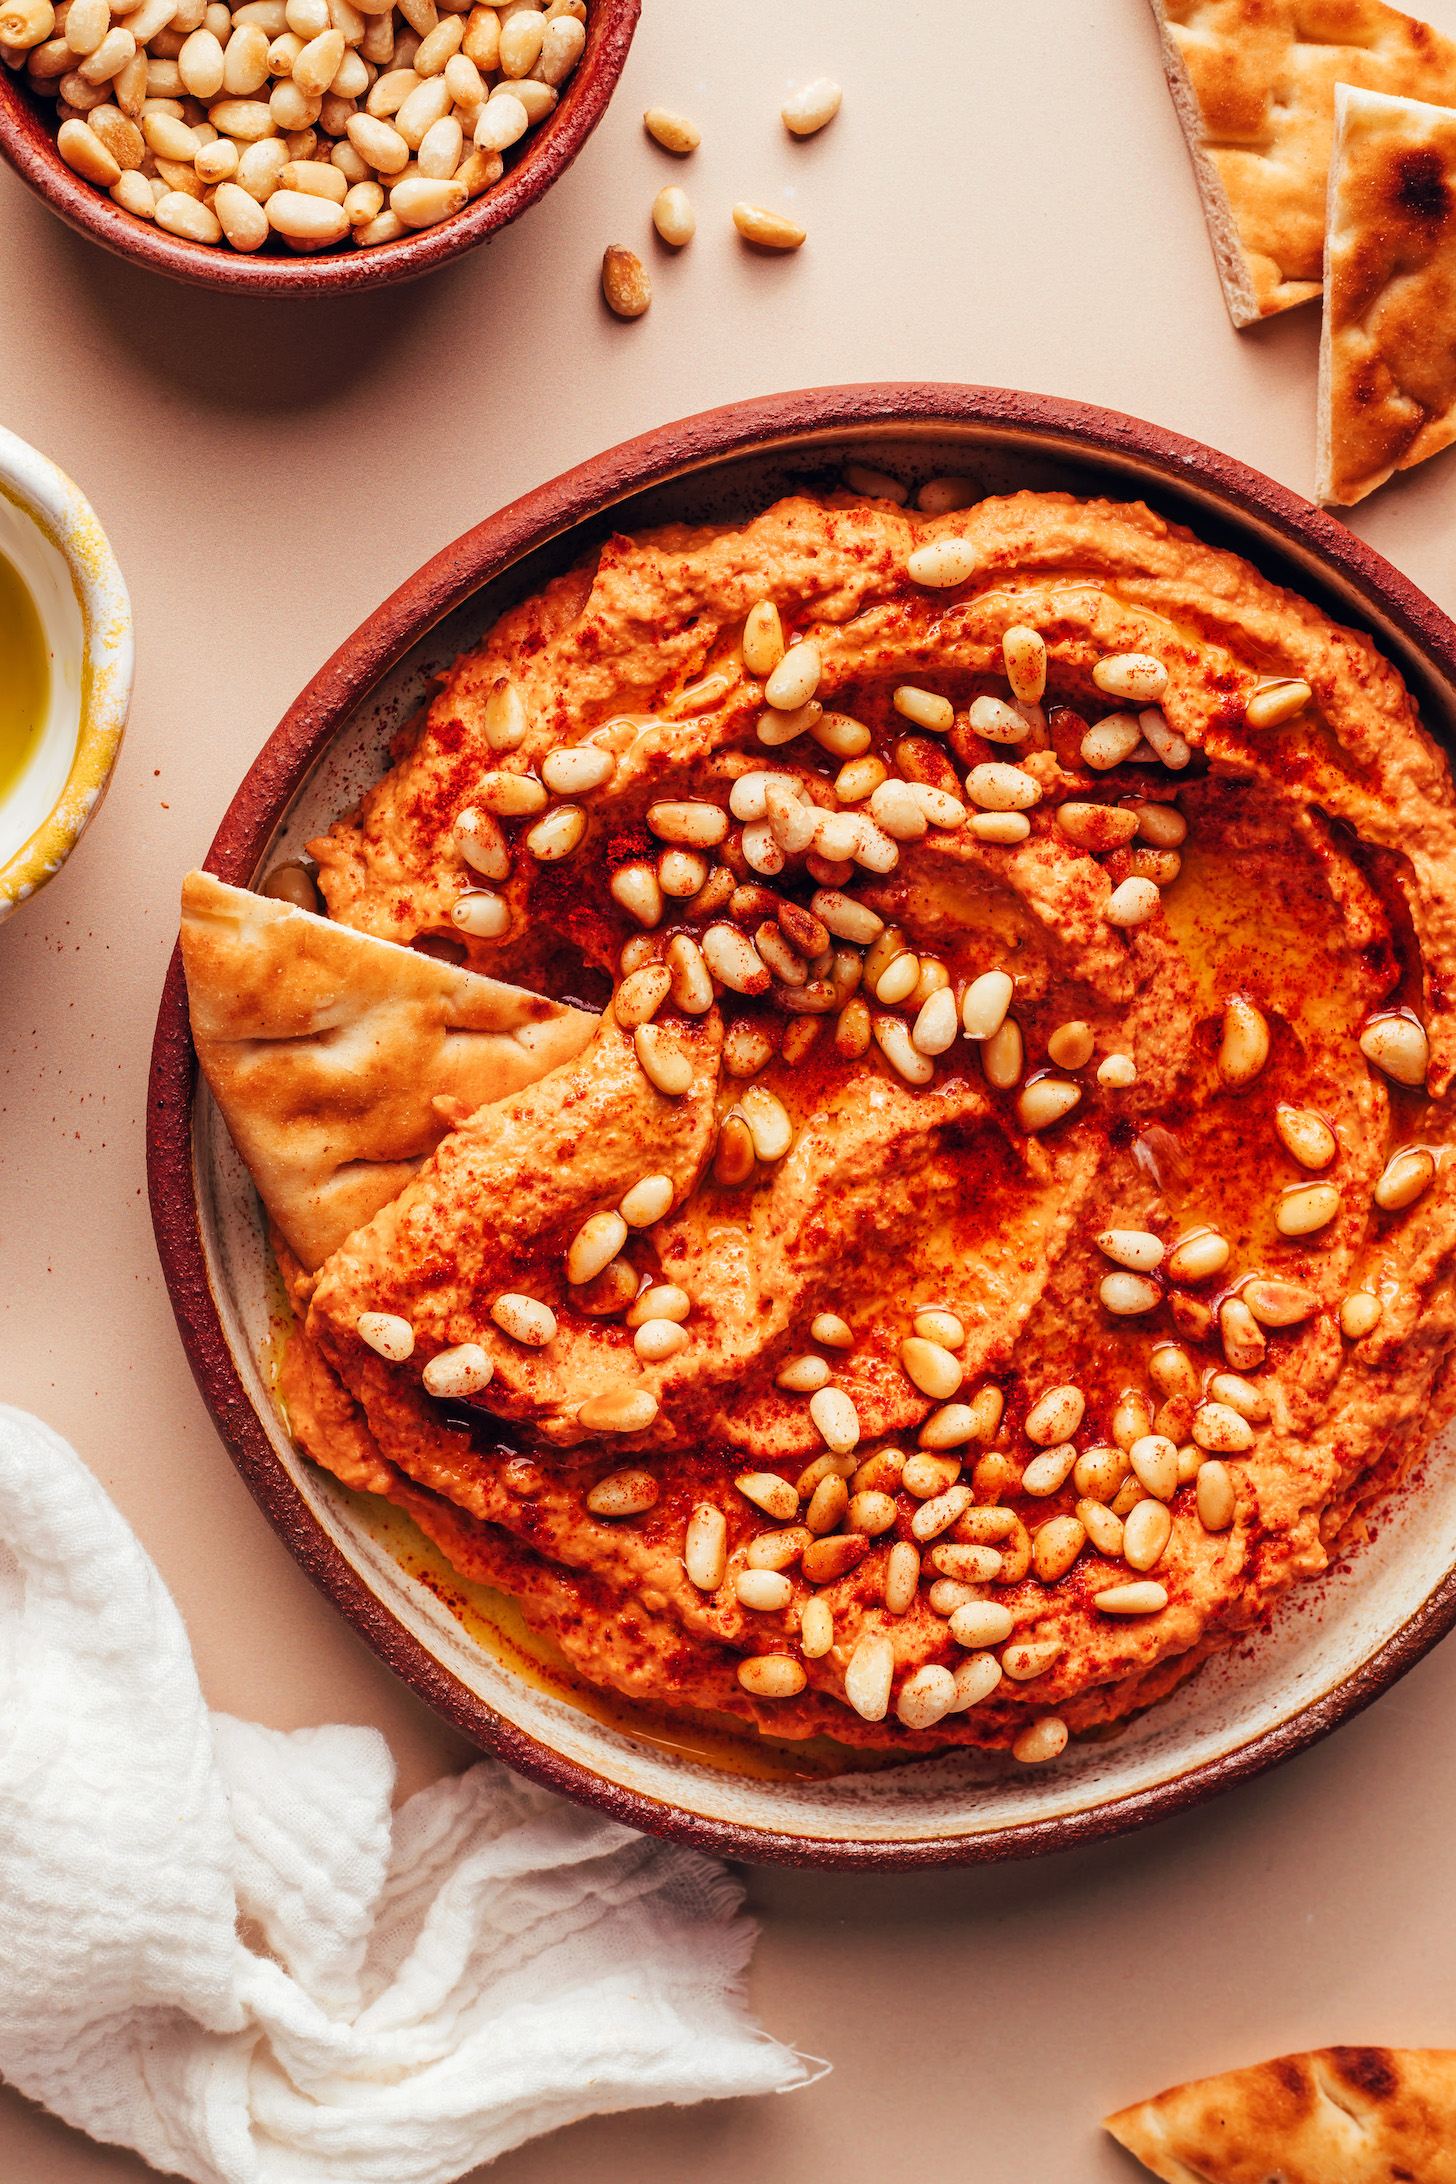 Slice of pita bread dipped into a bowl of sun-dried tomato hummus topped with pine nuts, olive oil, and smoked paprika